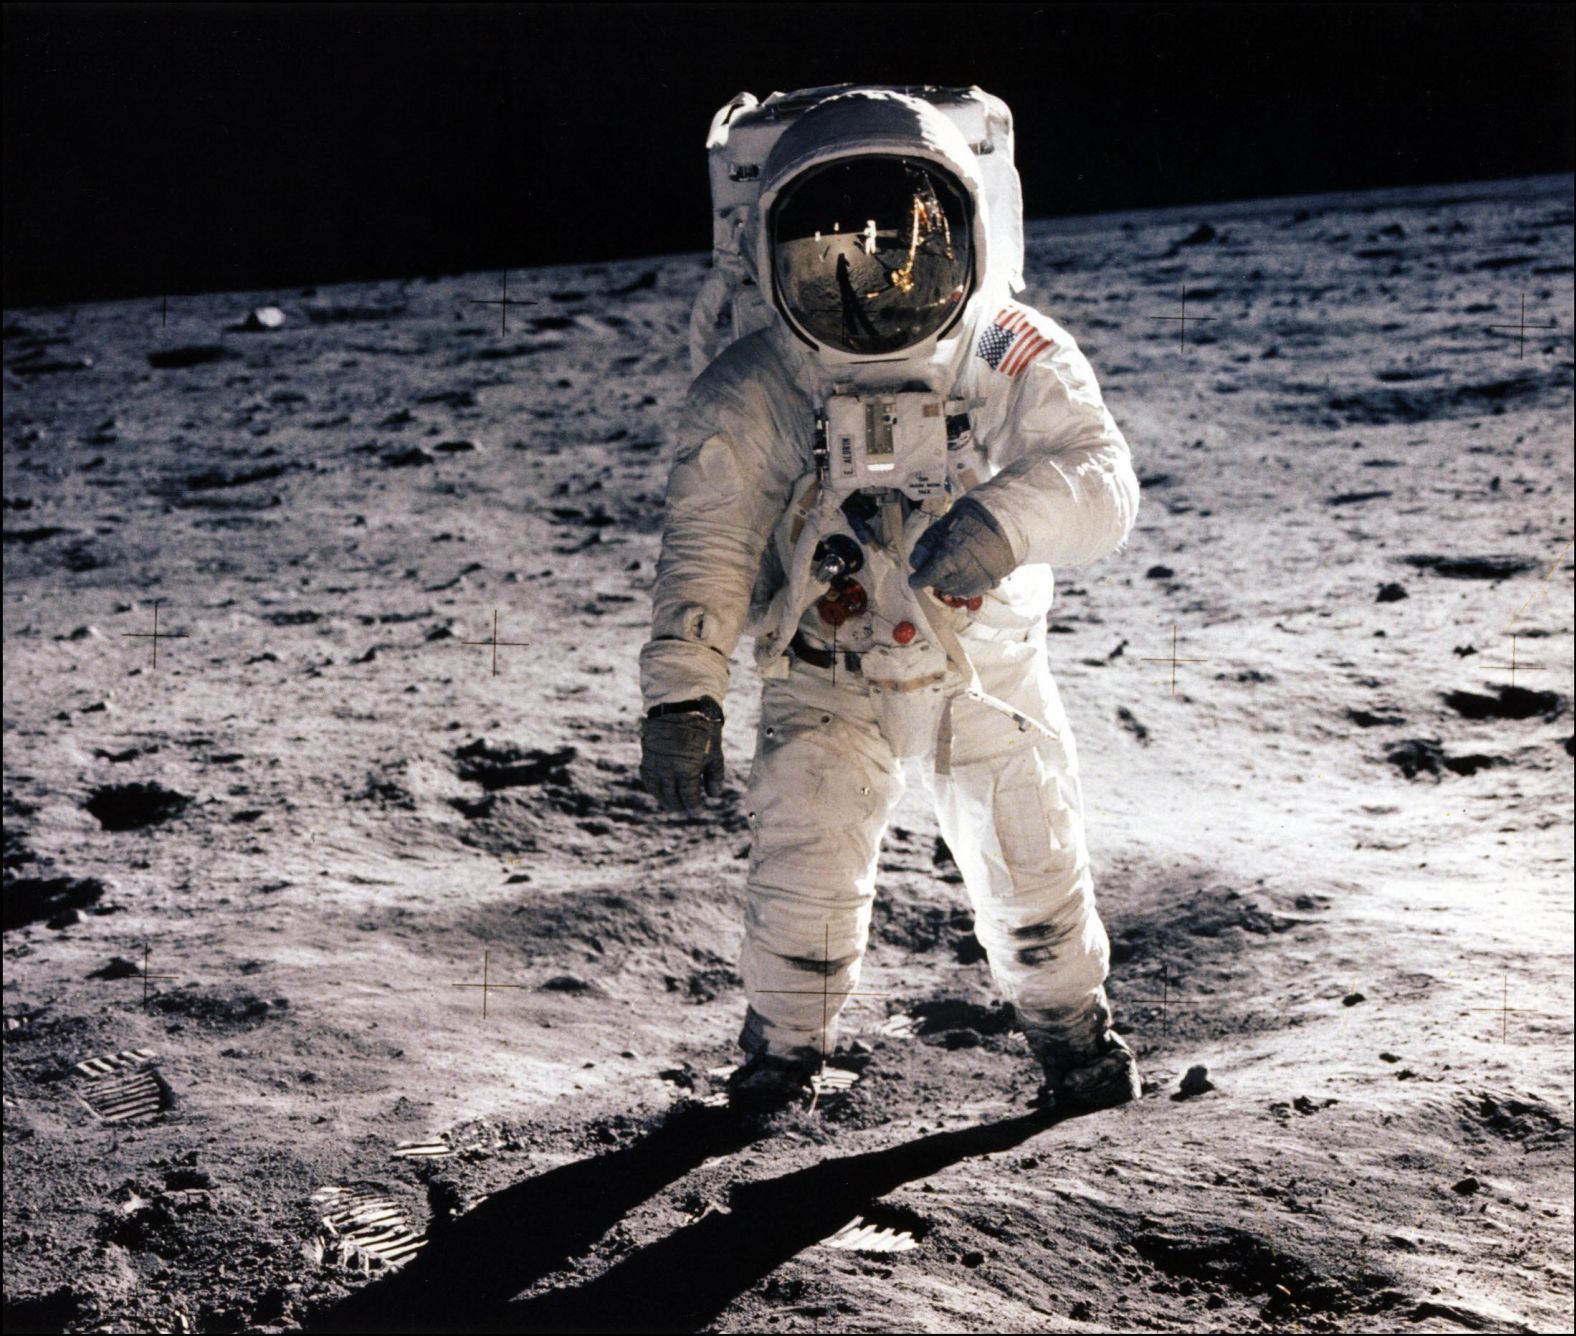 Apollo 11 astronaut Edwin E. "Buzz" Aldrin Jr. walks on the lunar surface on July 20, 1969. He and mission commander Neil Armstrong became the first humans to walk on the moon. Their mission was considered an American victory in the Cold War and subsequent space race, meeting President Kennedy's goal, voiced in 1961, of "landing a man on the moon and returning him safely to the earth" before the end of the decade.